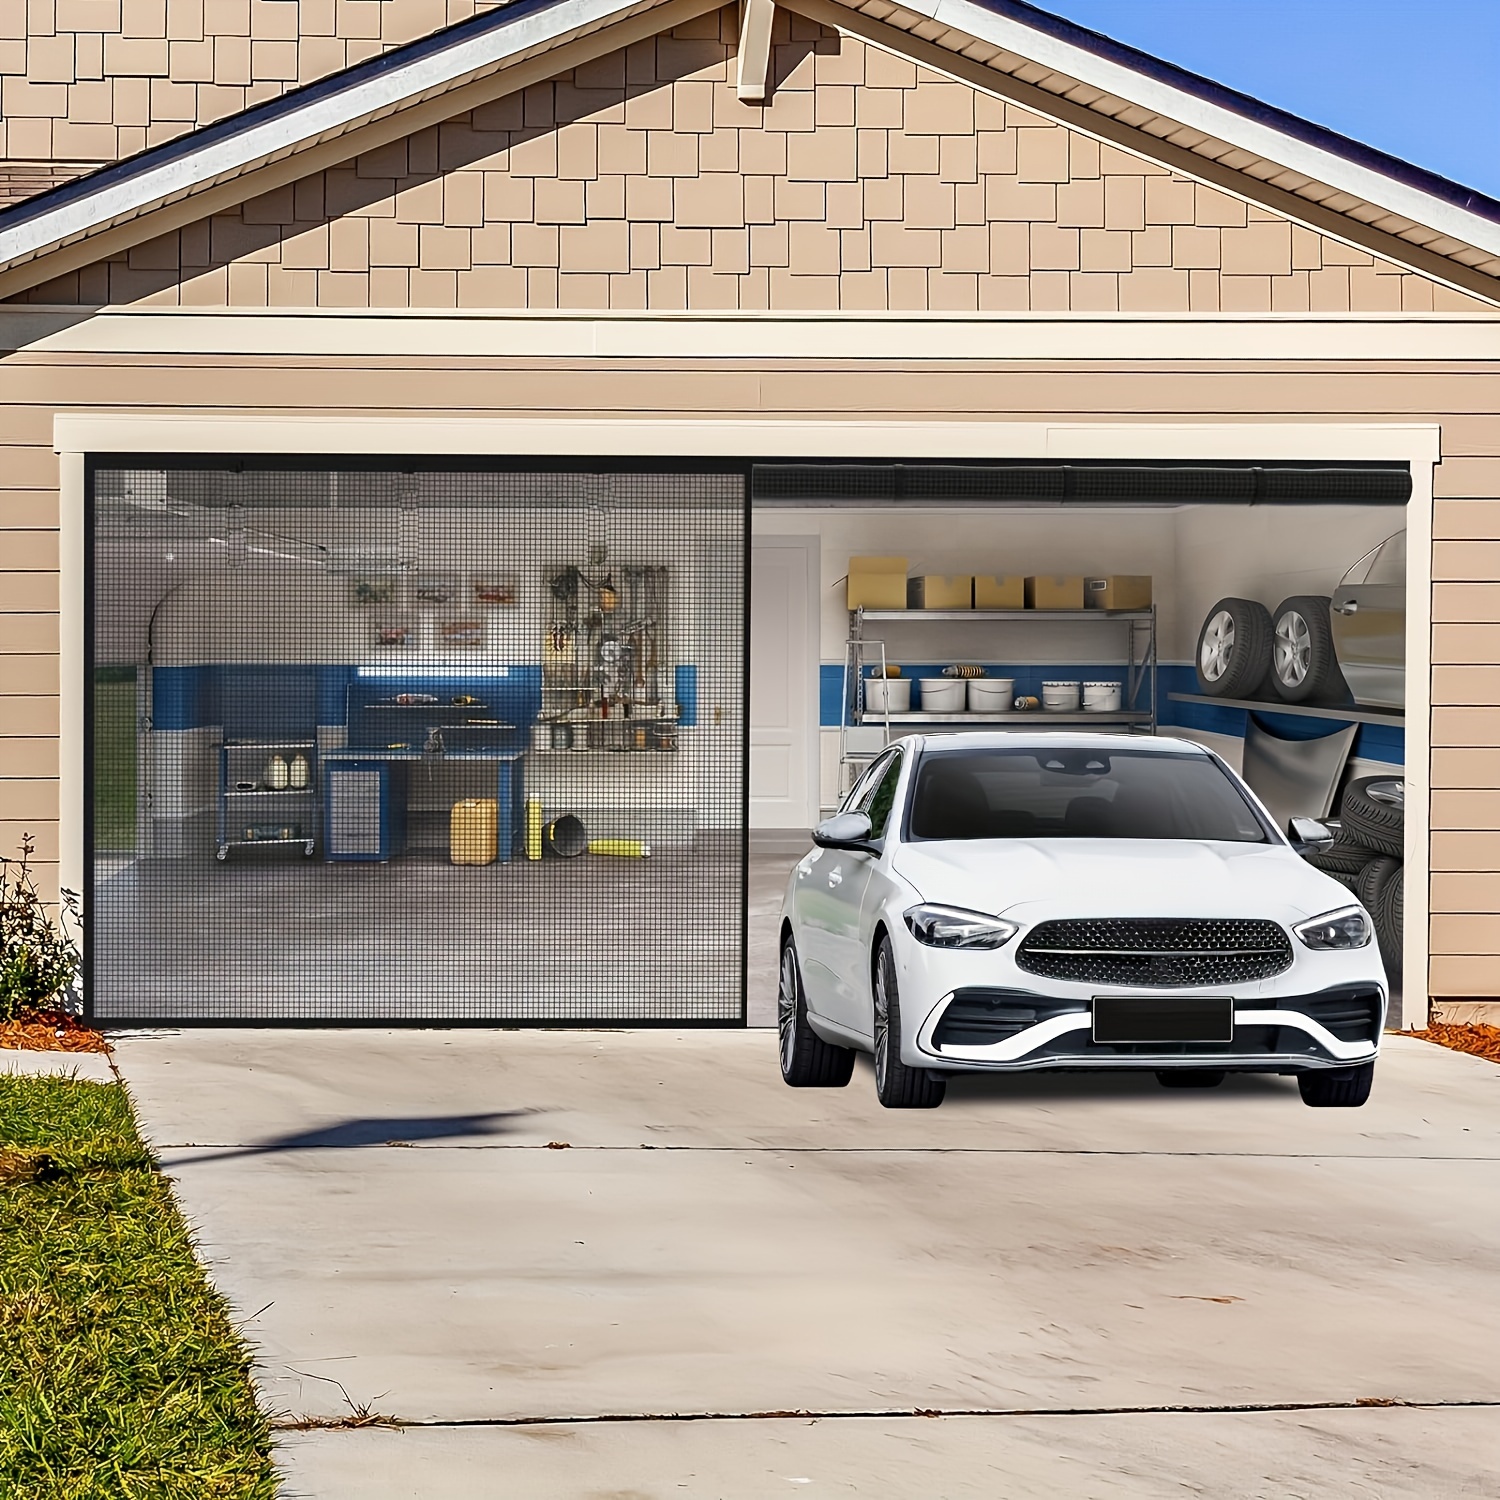 

1pc Double Garage Screen Door, Magnetic Closure, Fiberglass Mesh For 2 Car Garage, Full Frame Hook & Loop, Hands-free, Pet Friendly, Prevents Bugs And Mosquitoes, Easy To Install Garage Net Kit